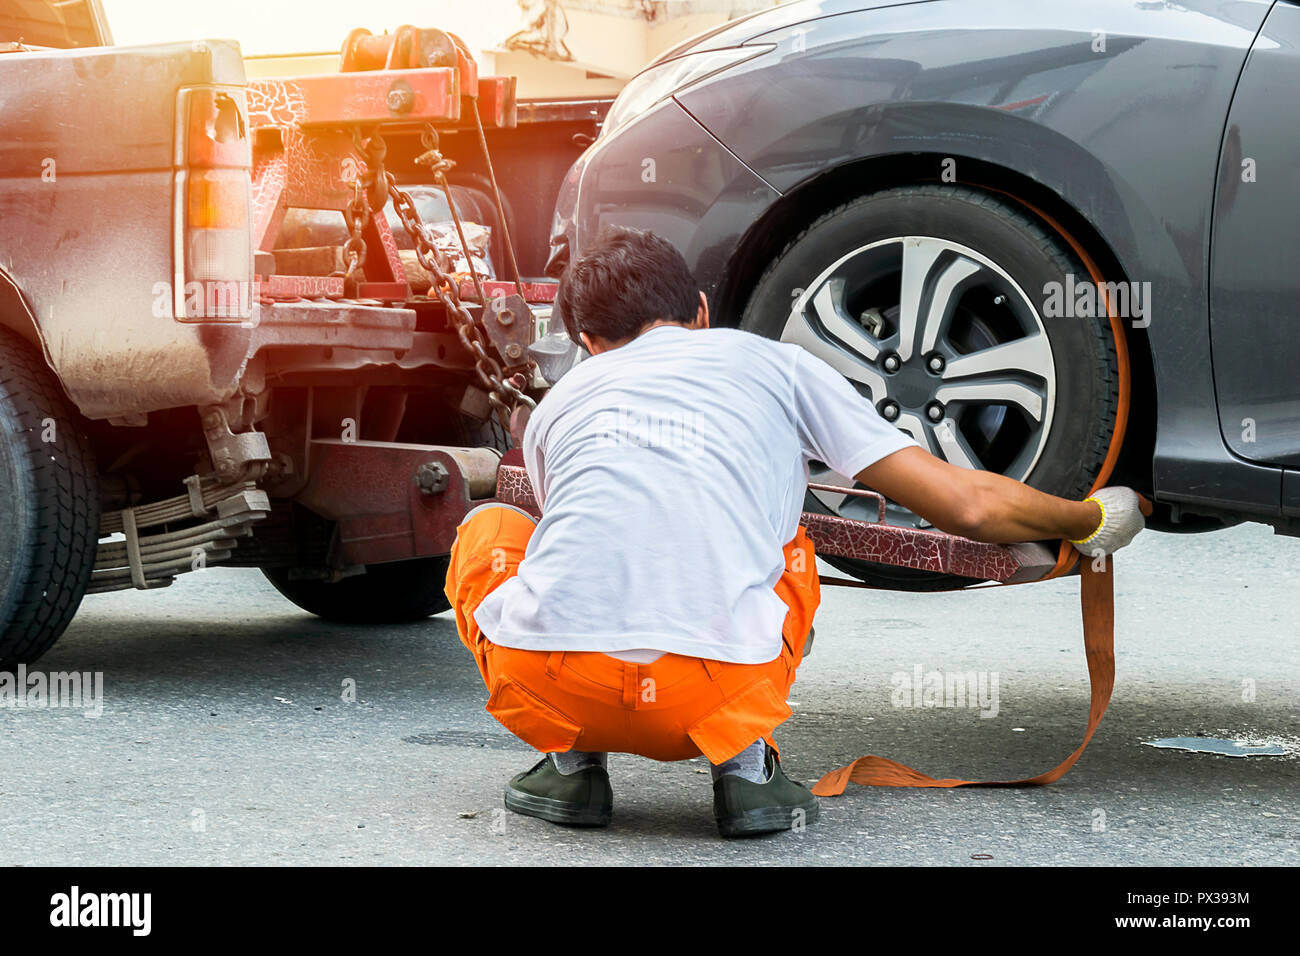 Traveling by car is a major vehicle, the car can not be used and repair is moving, Hire a mechanic to pull the car. To repair the maintenance center. Stock Photo